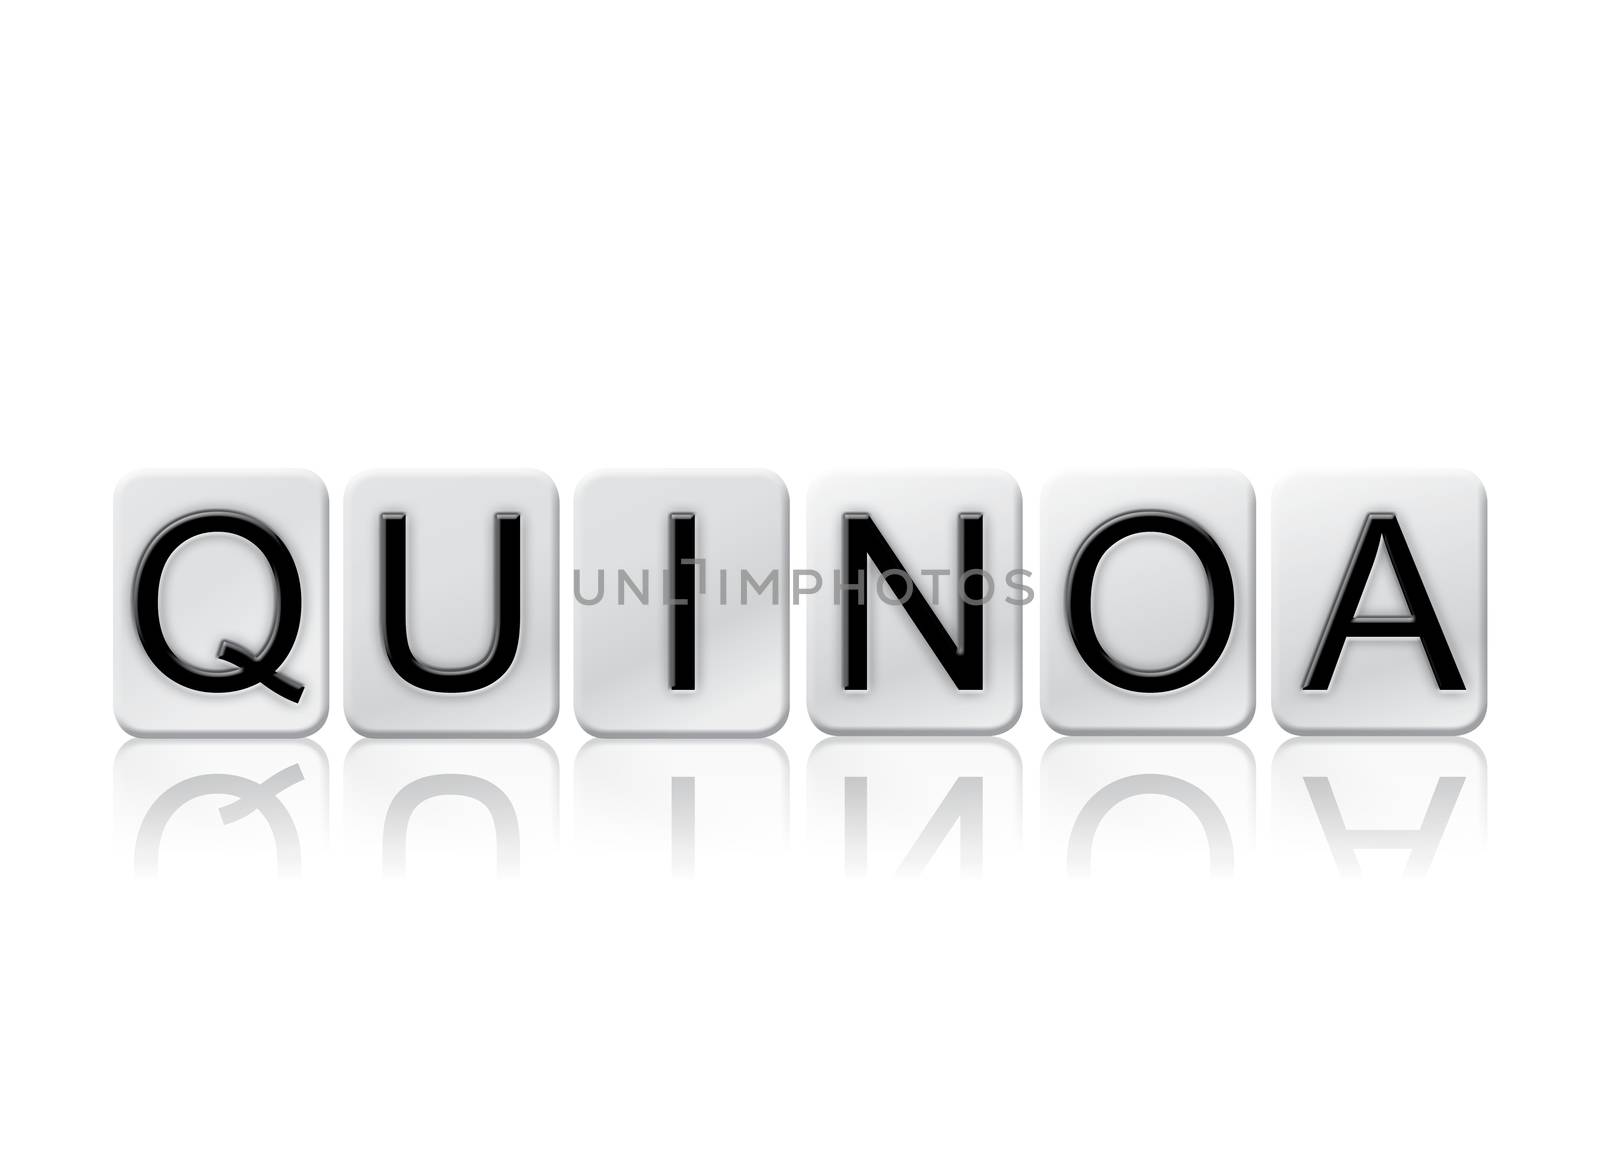 The word "Quinoa" written in tile letters isolated on a white background.